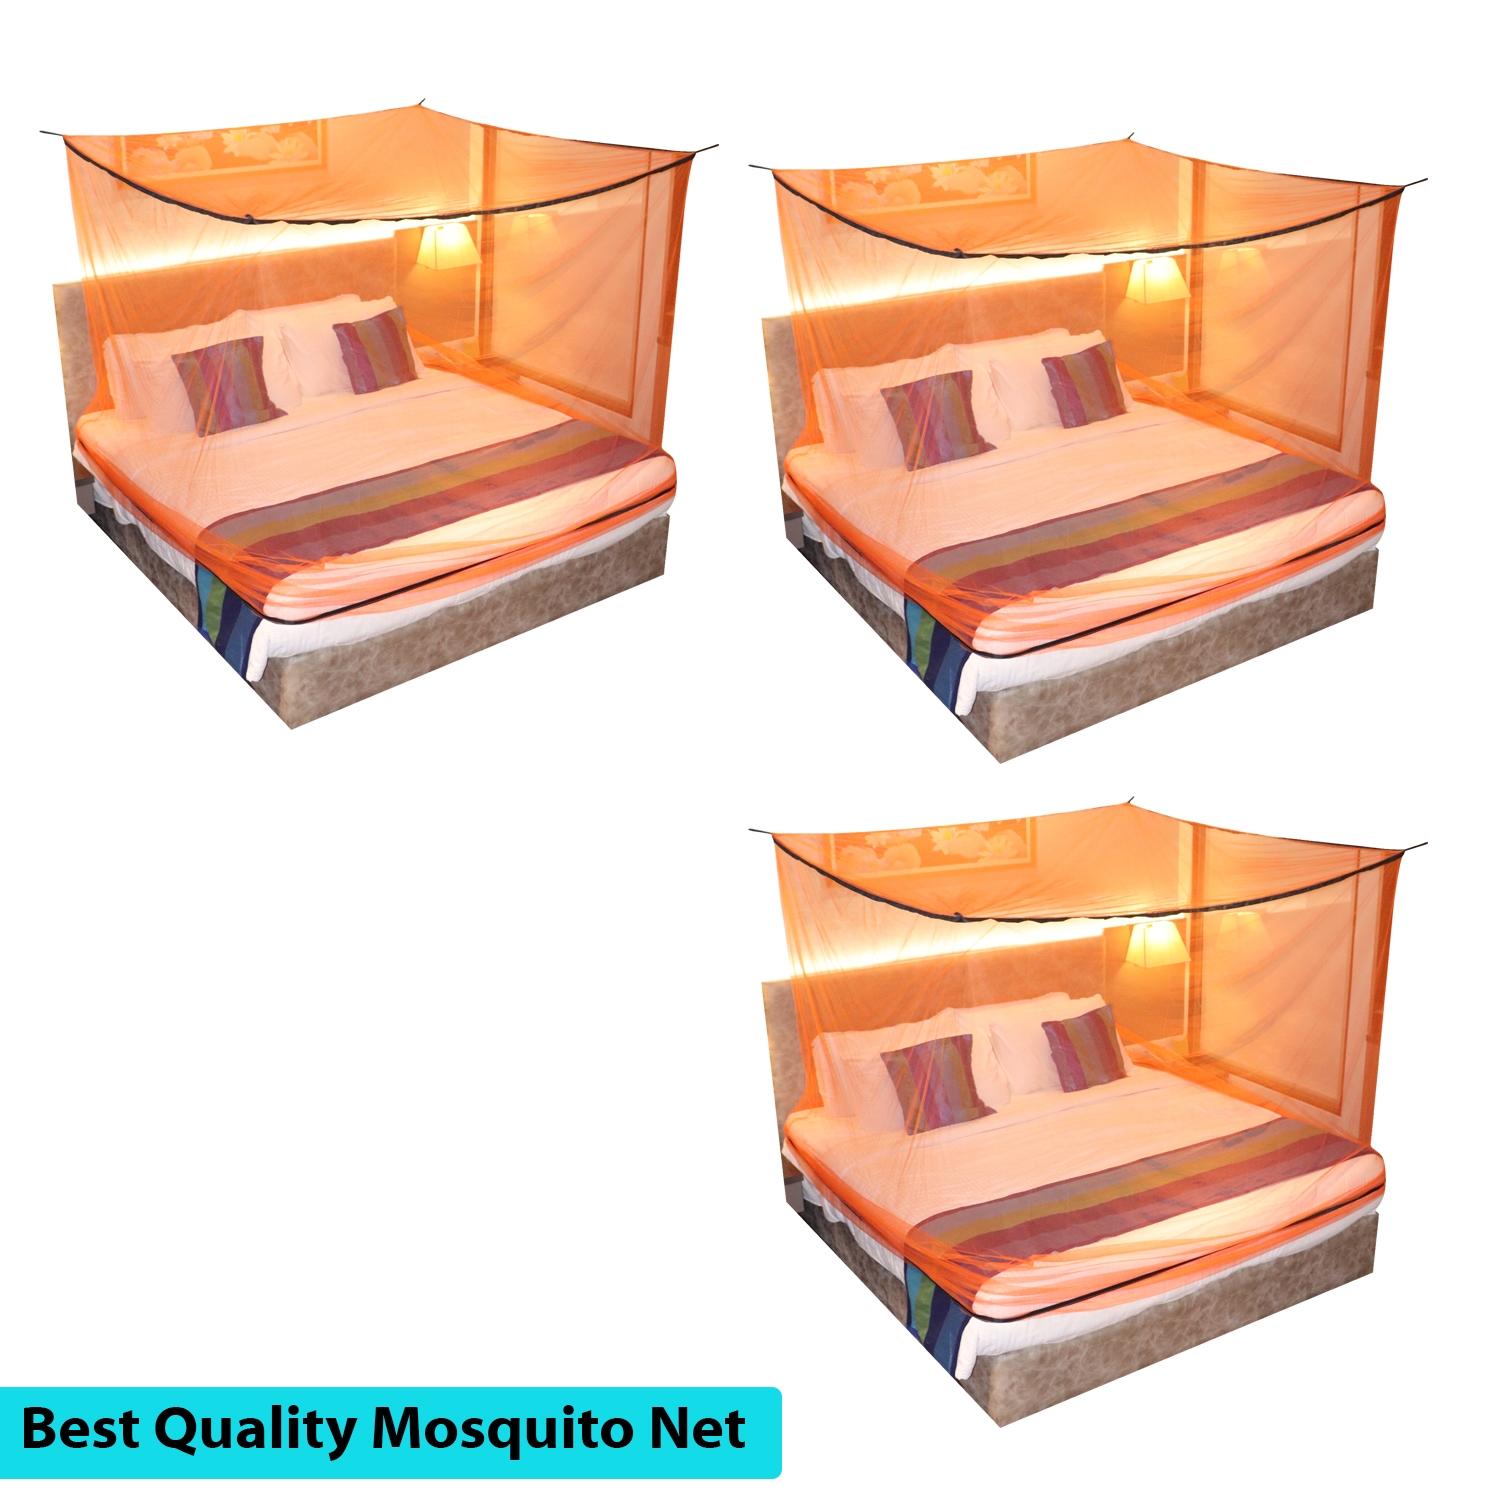 SILVER SHINE | Mosquito Net for Double Bed, King-Size, Square Hanging Foldable Polyester Net Orange And Black Pack of 3